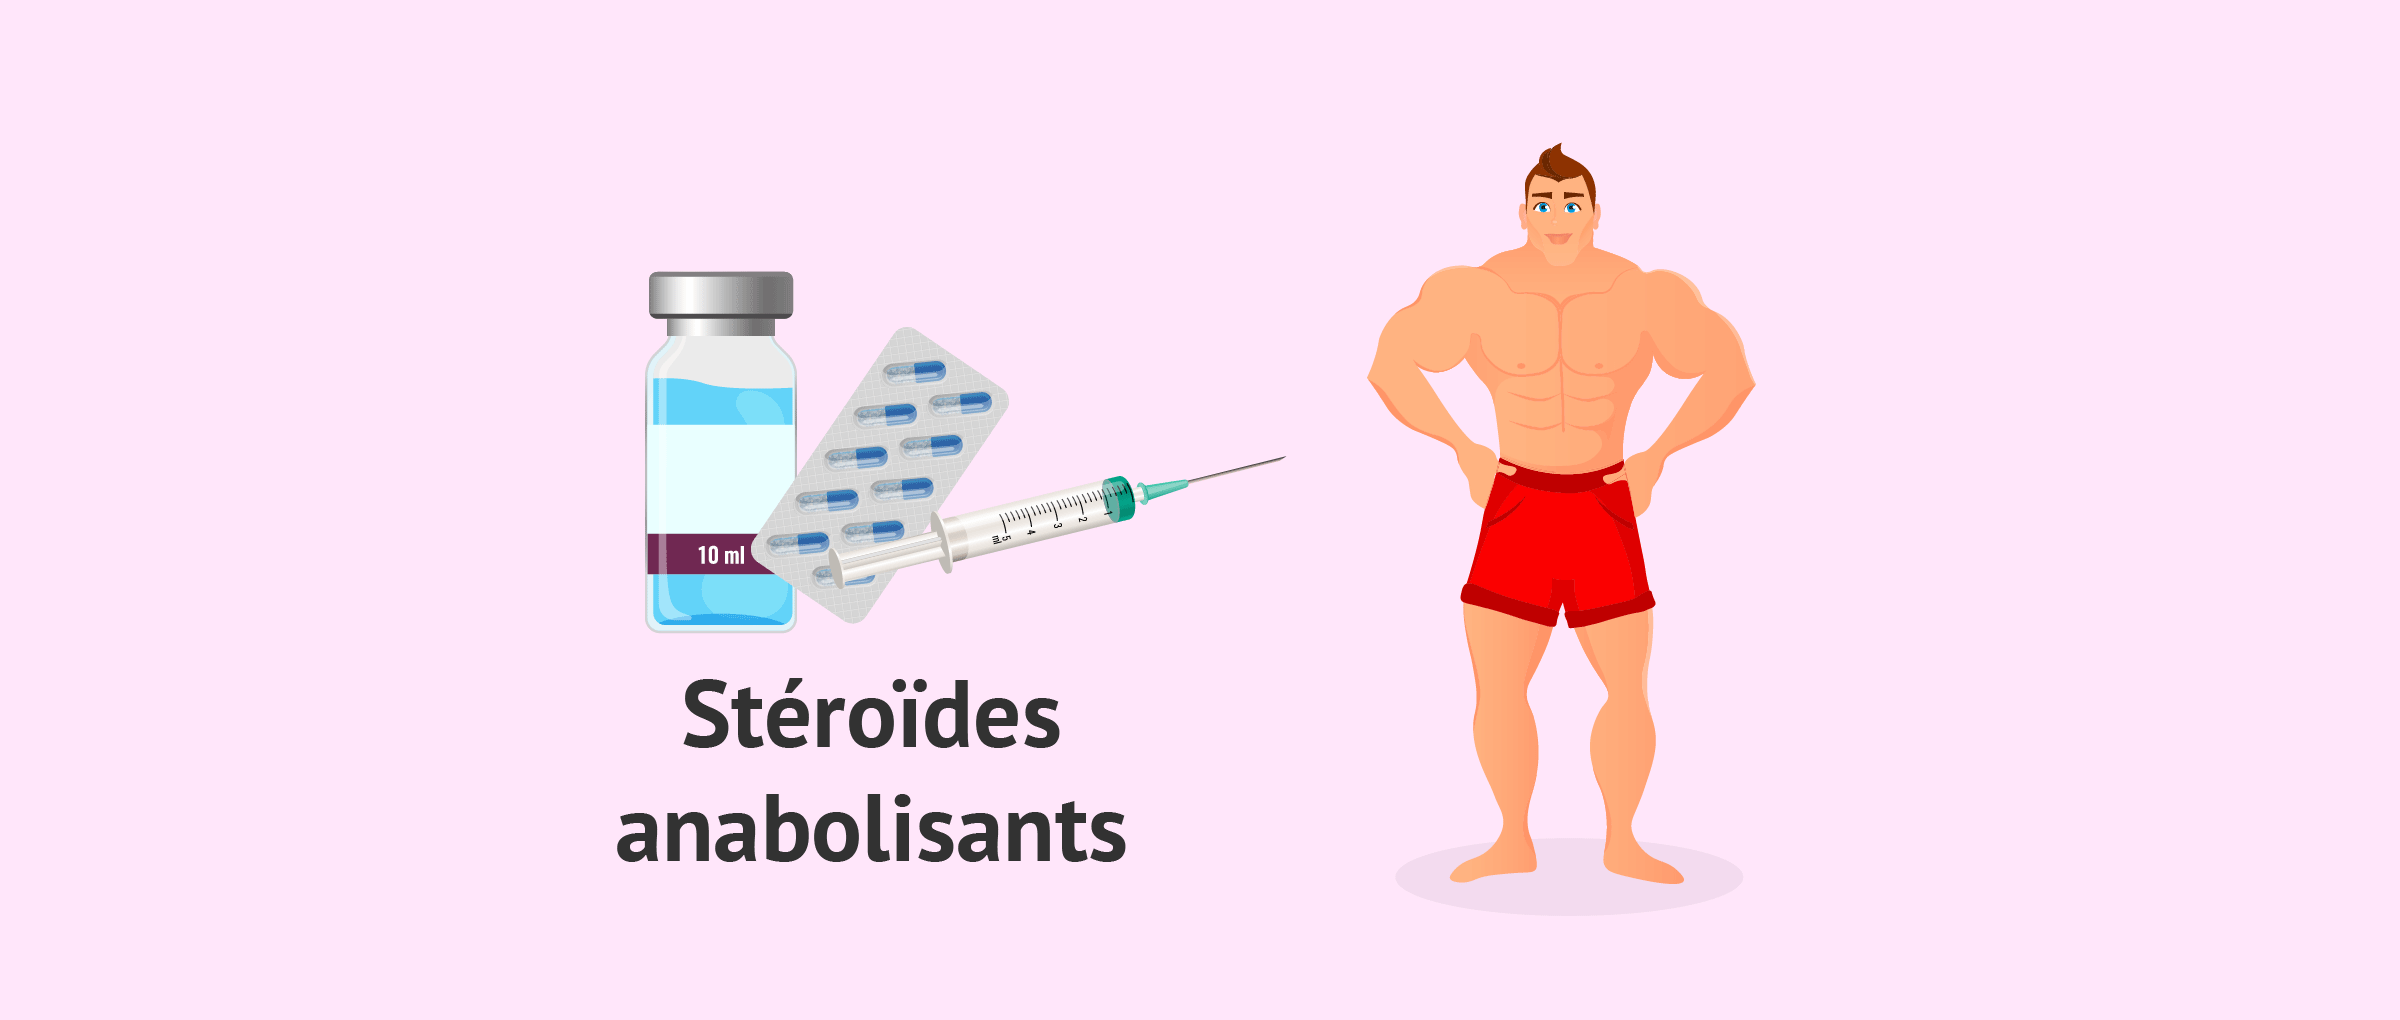 5 Reasons steroide pas cher Is A Waste Of Time